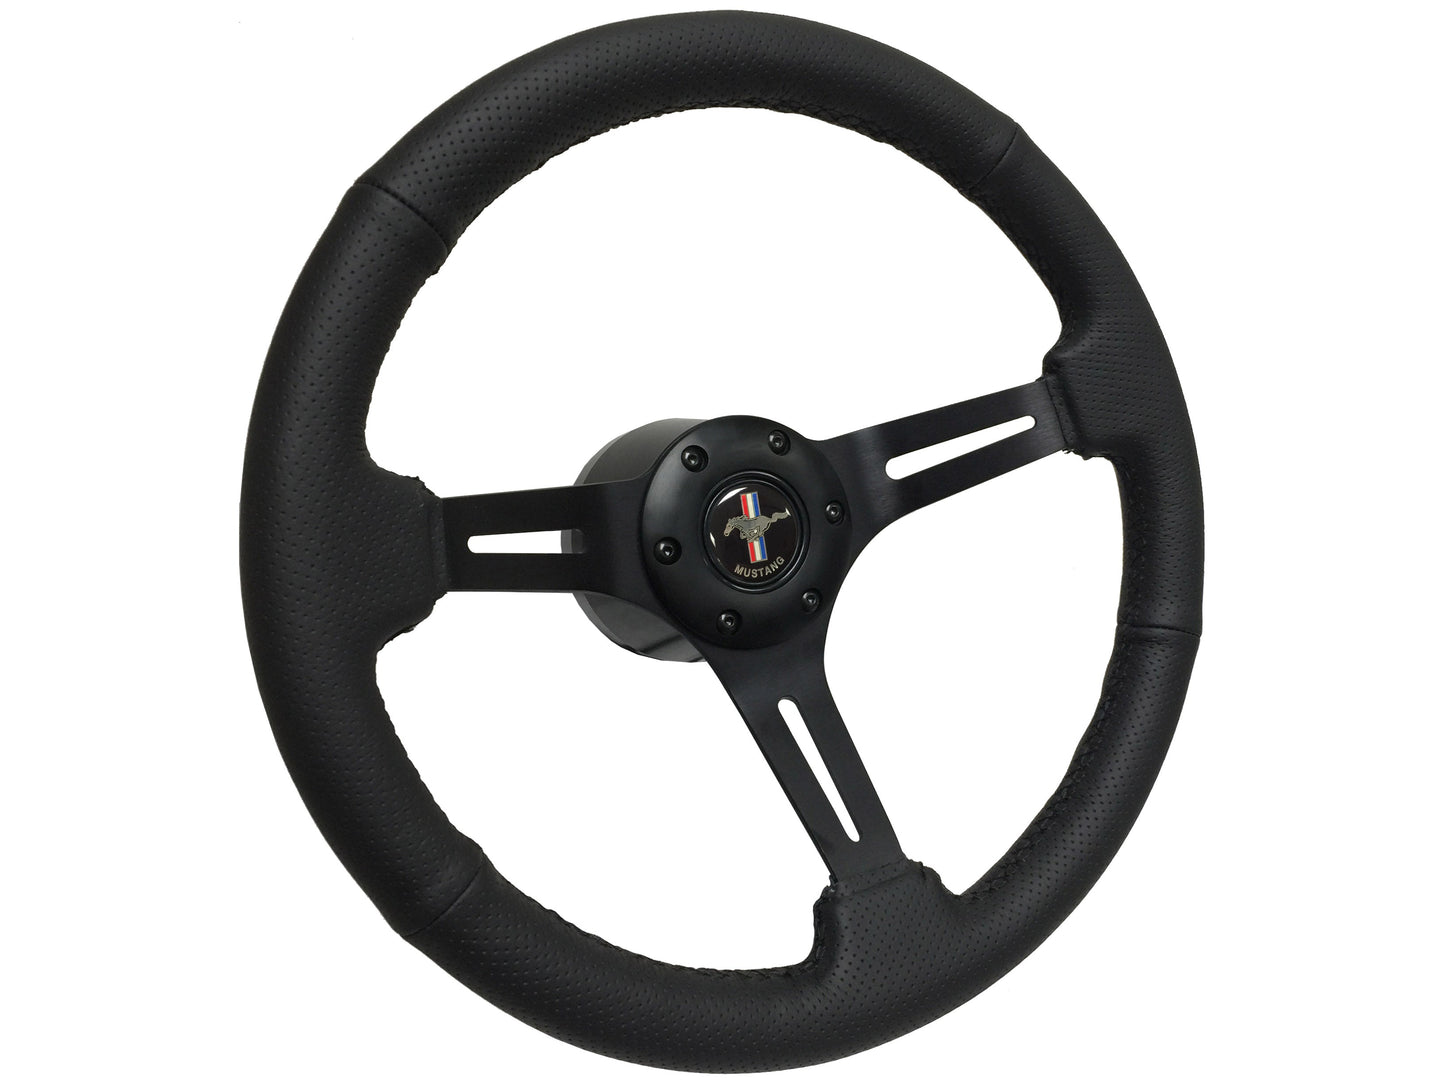 1965-67 Ford Mustang Steering Wheel Kit | Perforated Black Leather